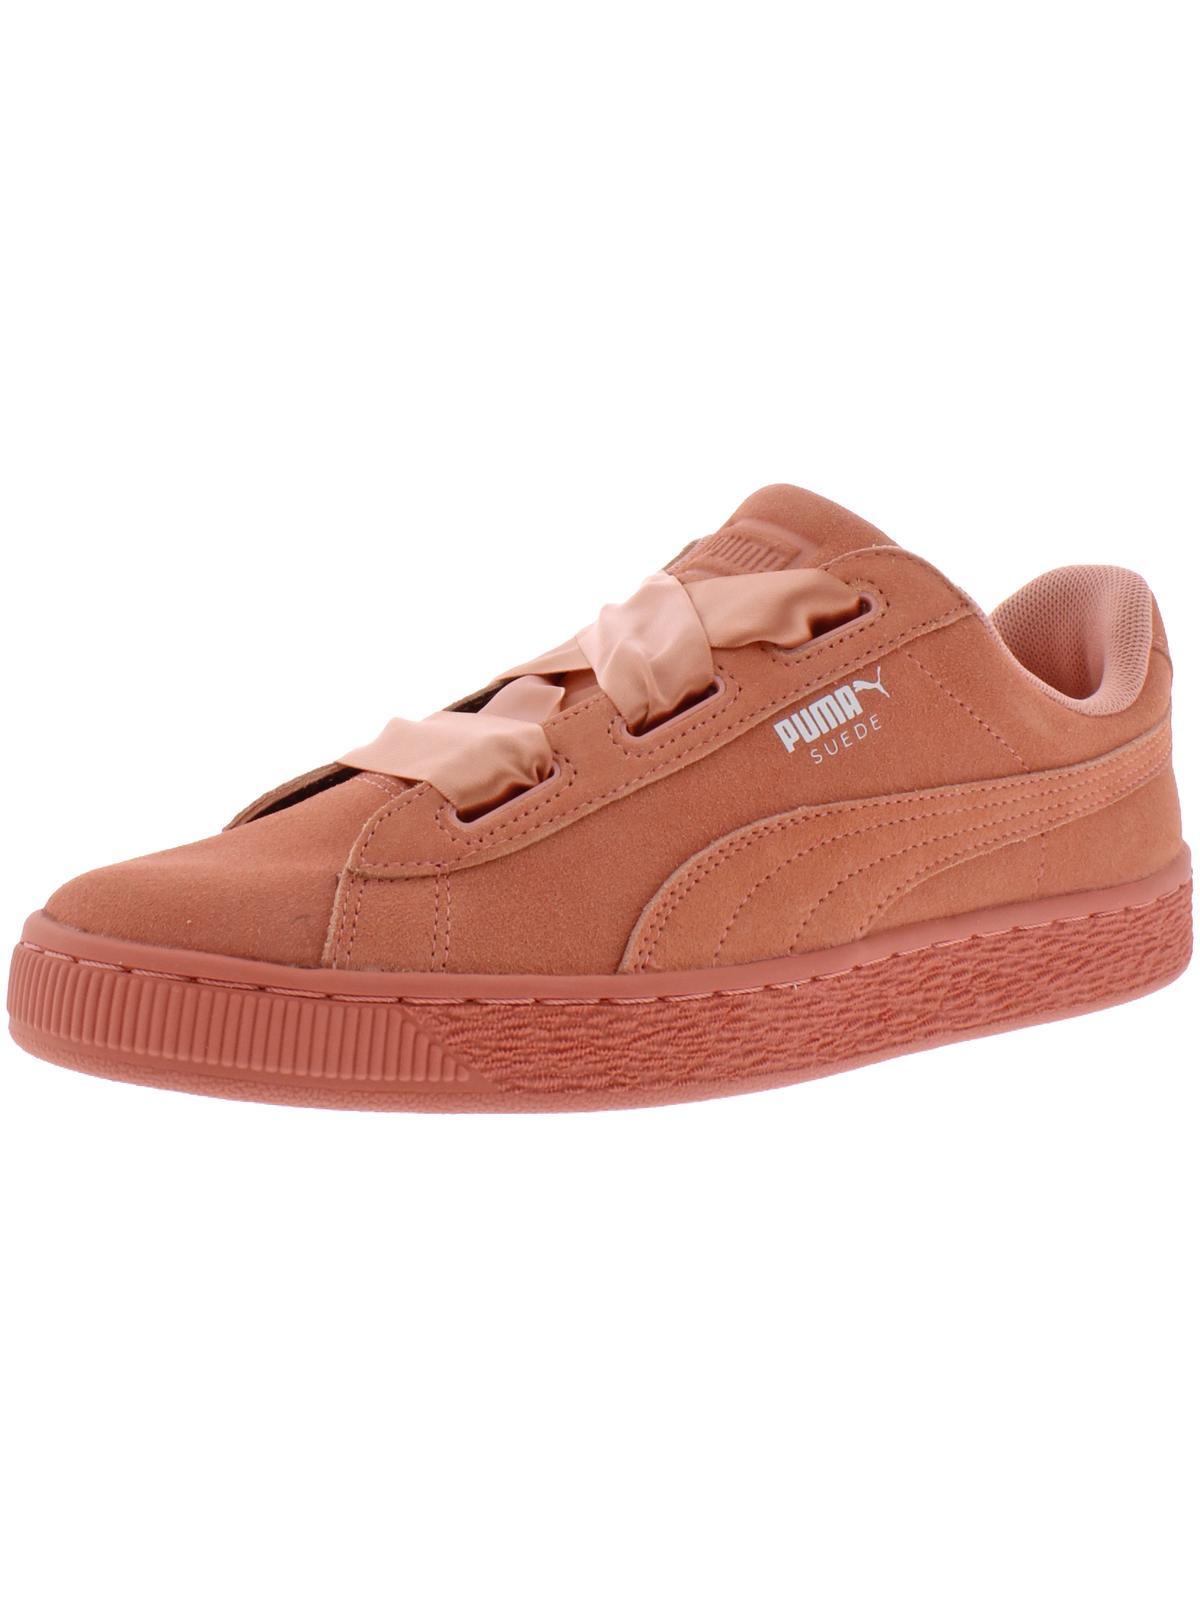 PUMA Suede Heart Jr Ake Suede Fashion Sneakers in Red | Lyst